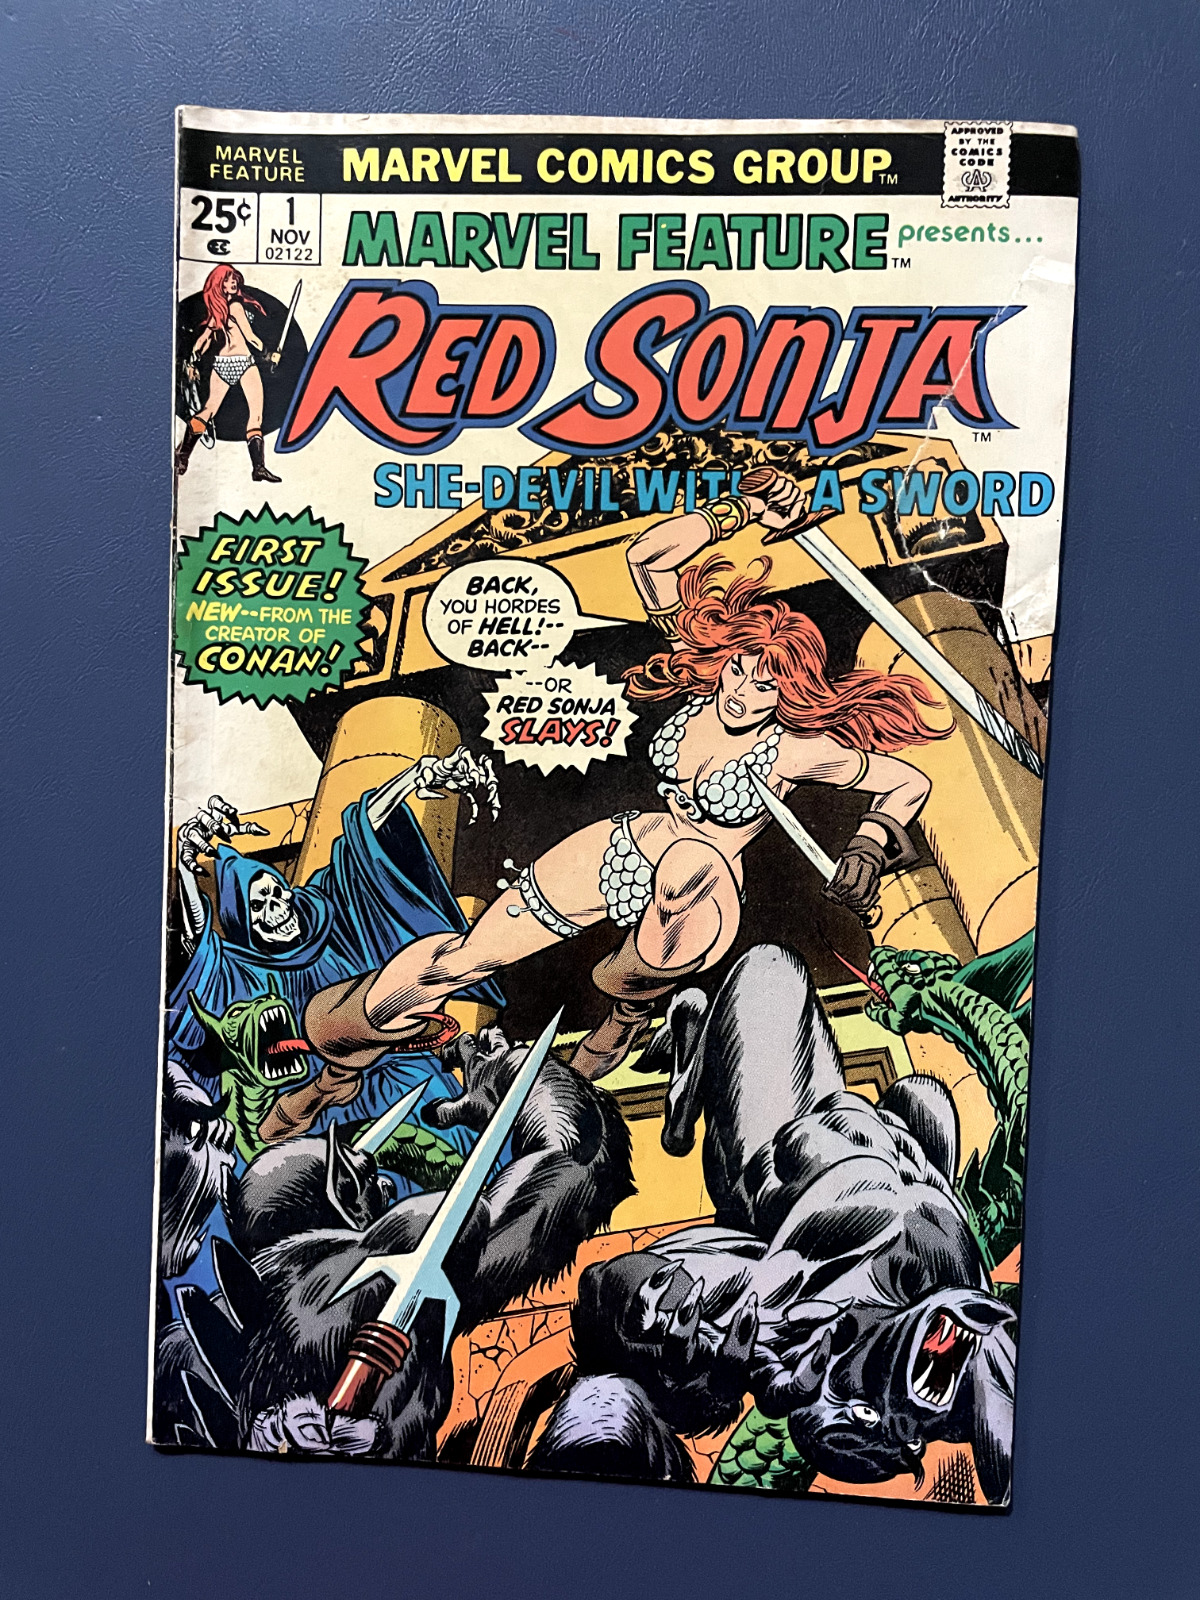 Marvel Feature #1 - Red Sonja